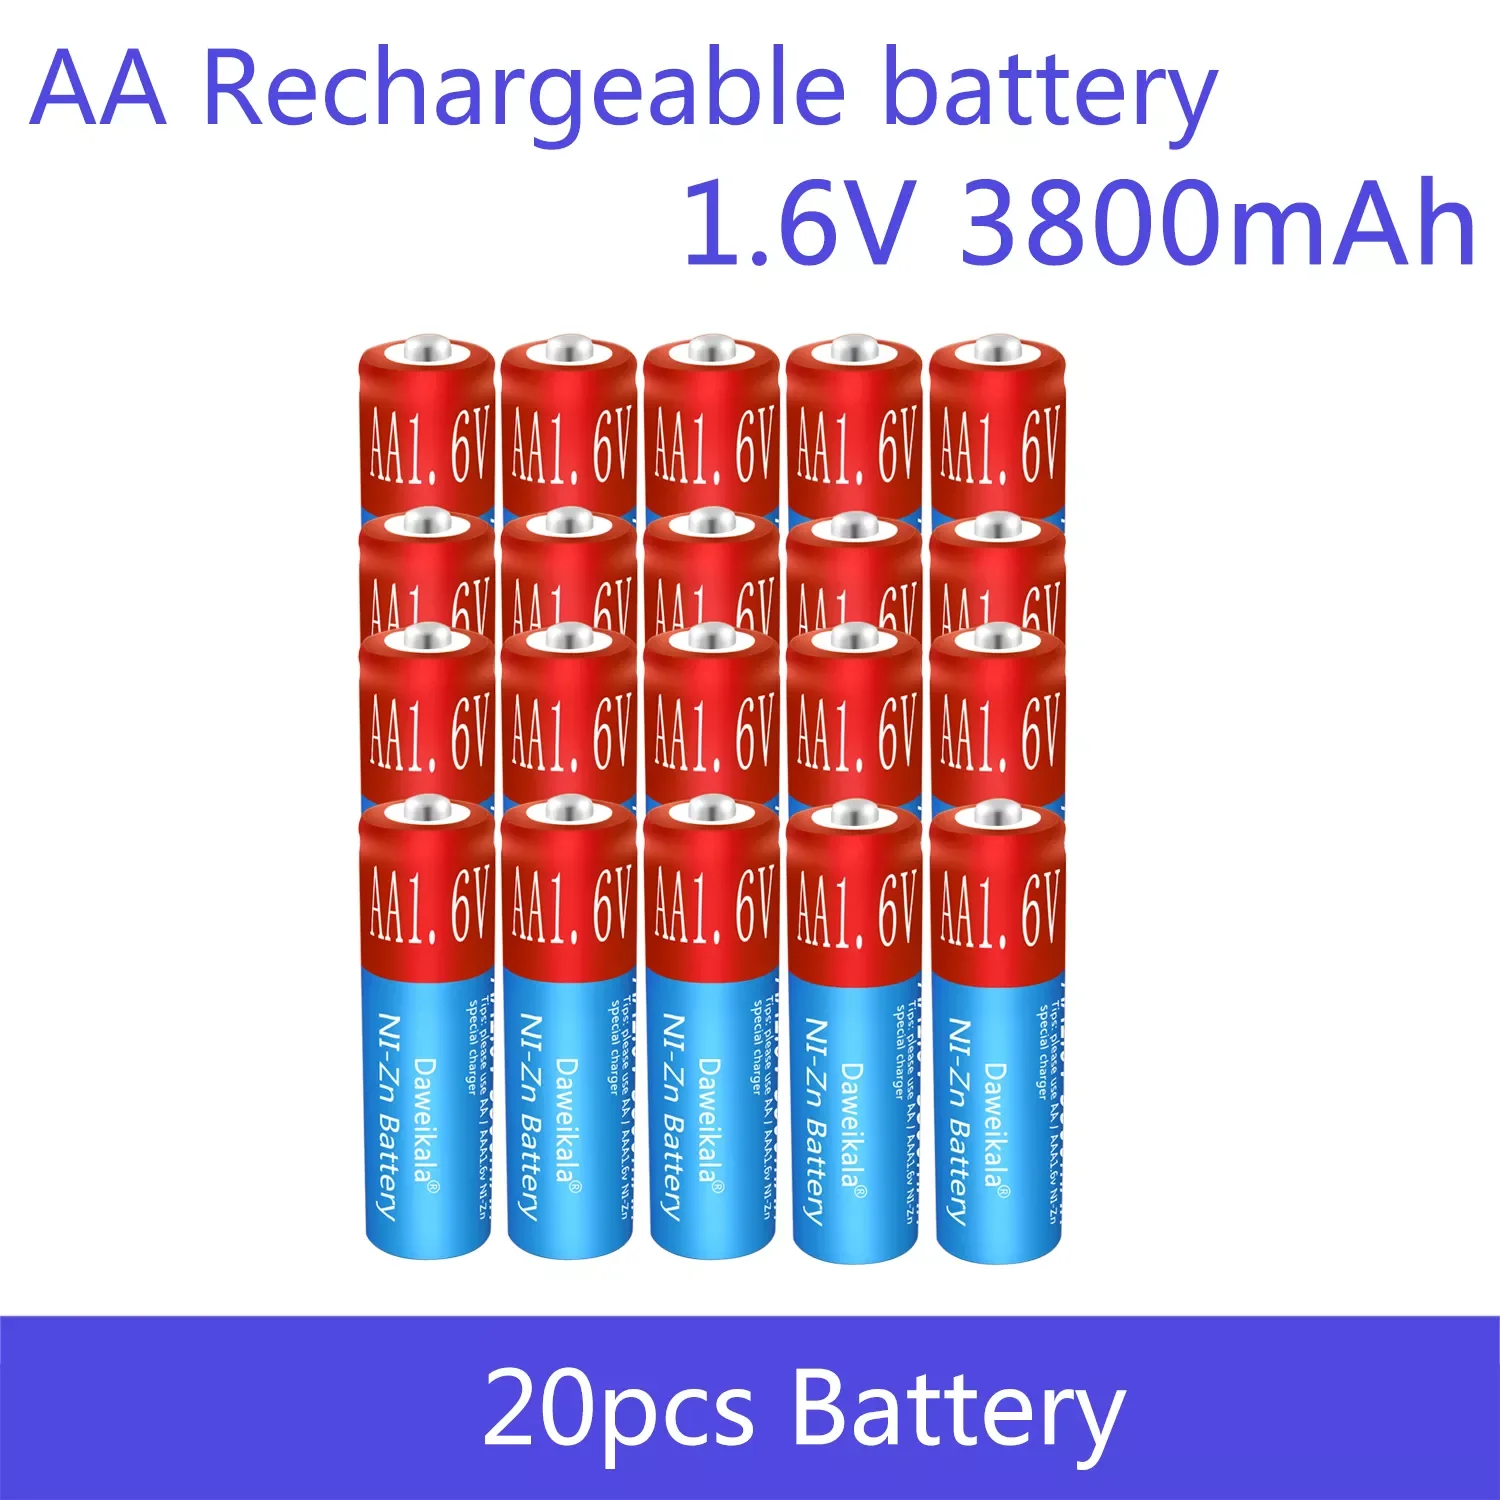 

NEW 20pcs/lot AA battery 3800mAh 1.6V Ni-Zn aa rechargeable battery Replace 1.5V/1.2V AA Battery for Toys Camera Remote control